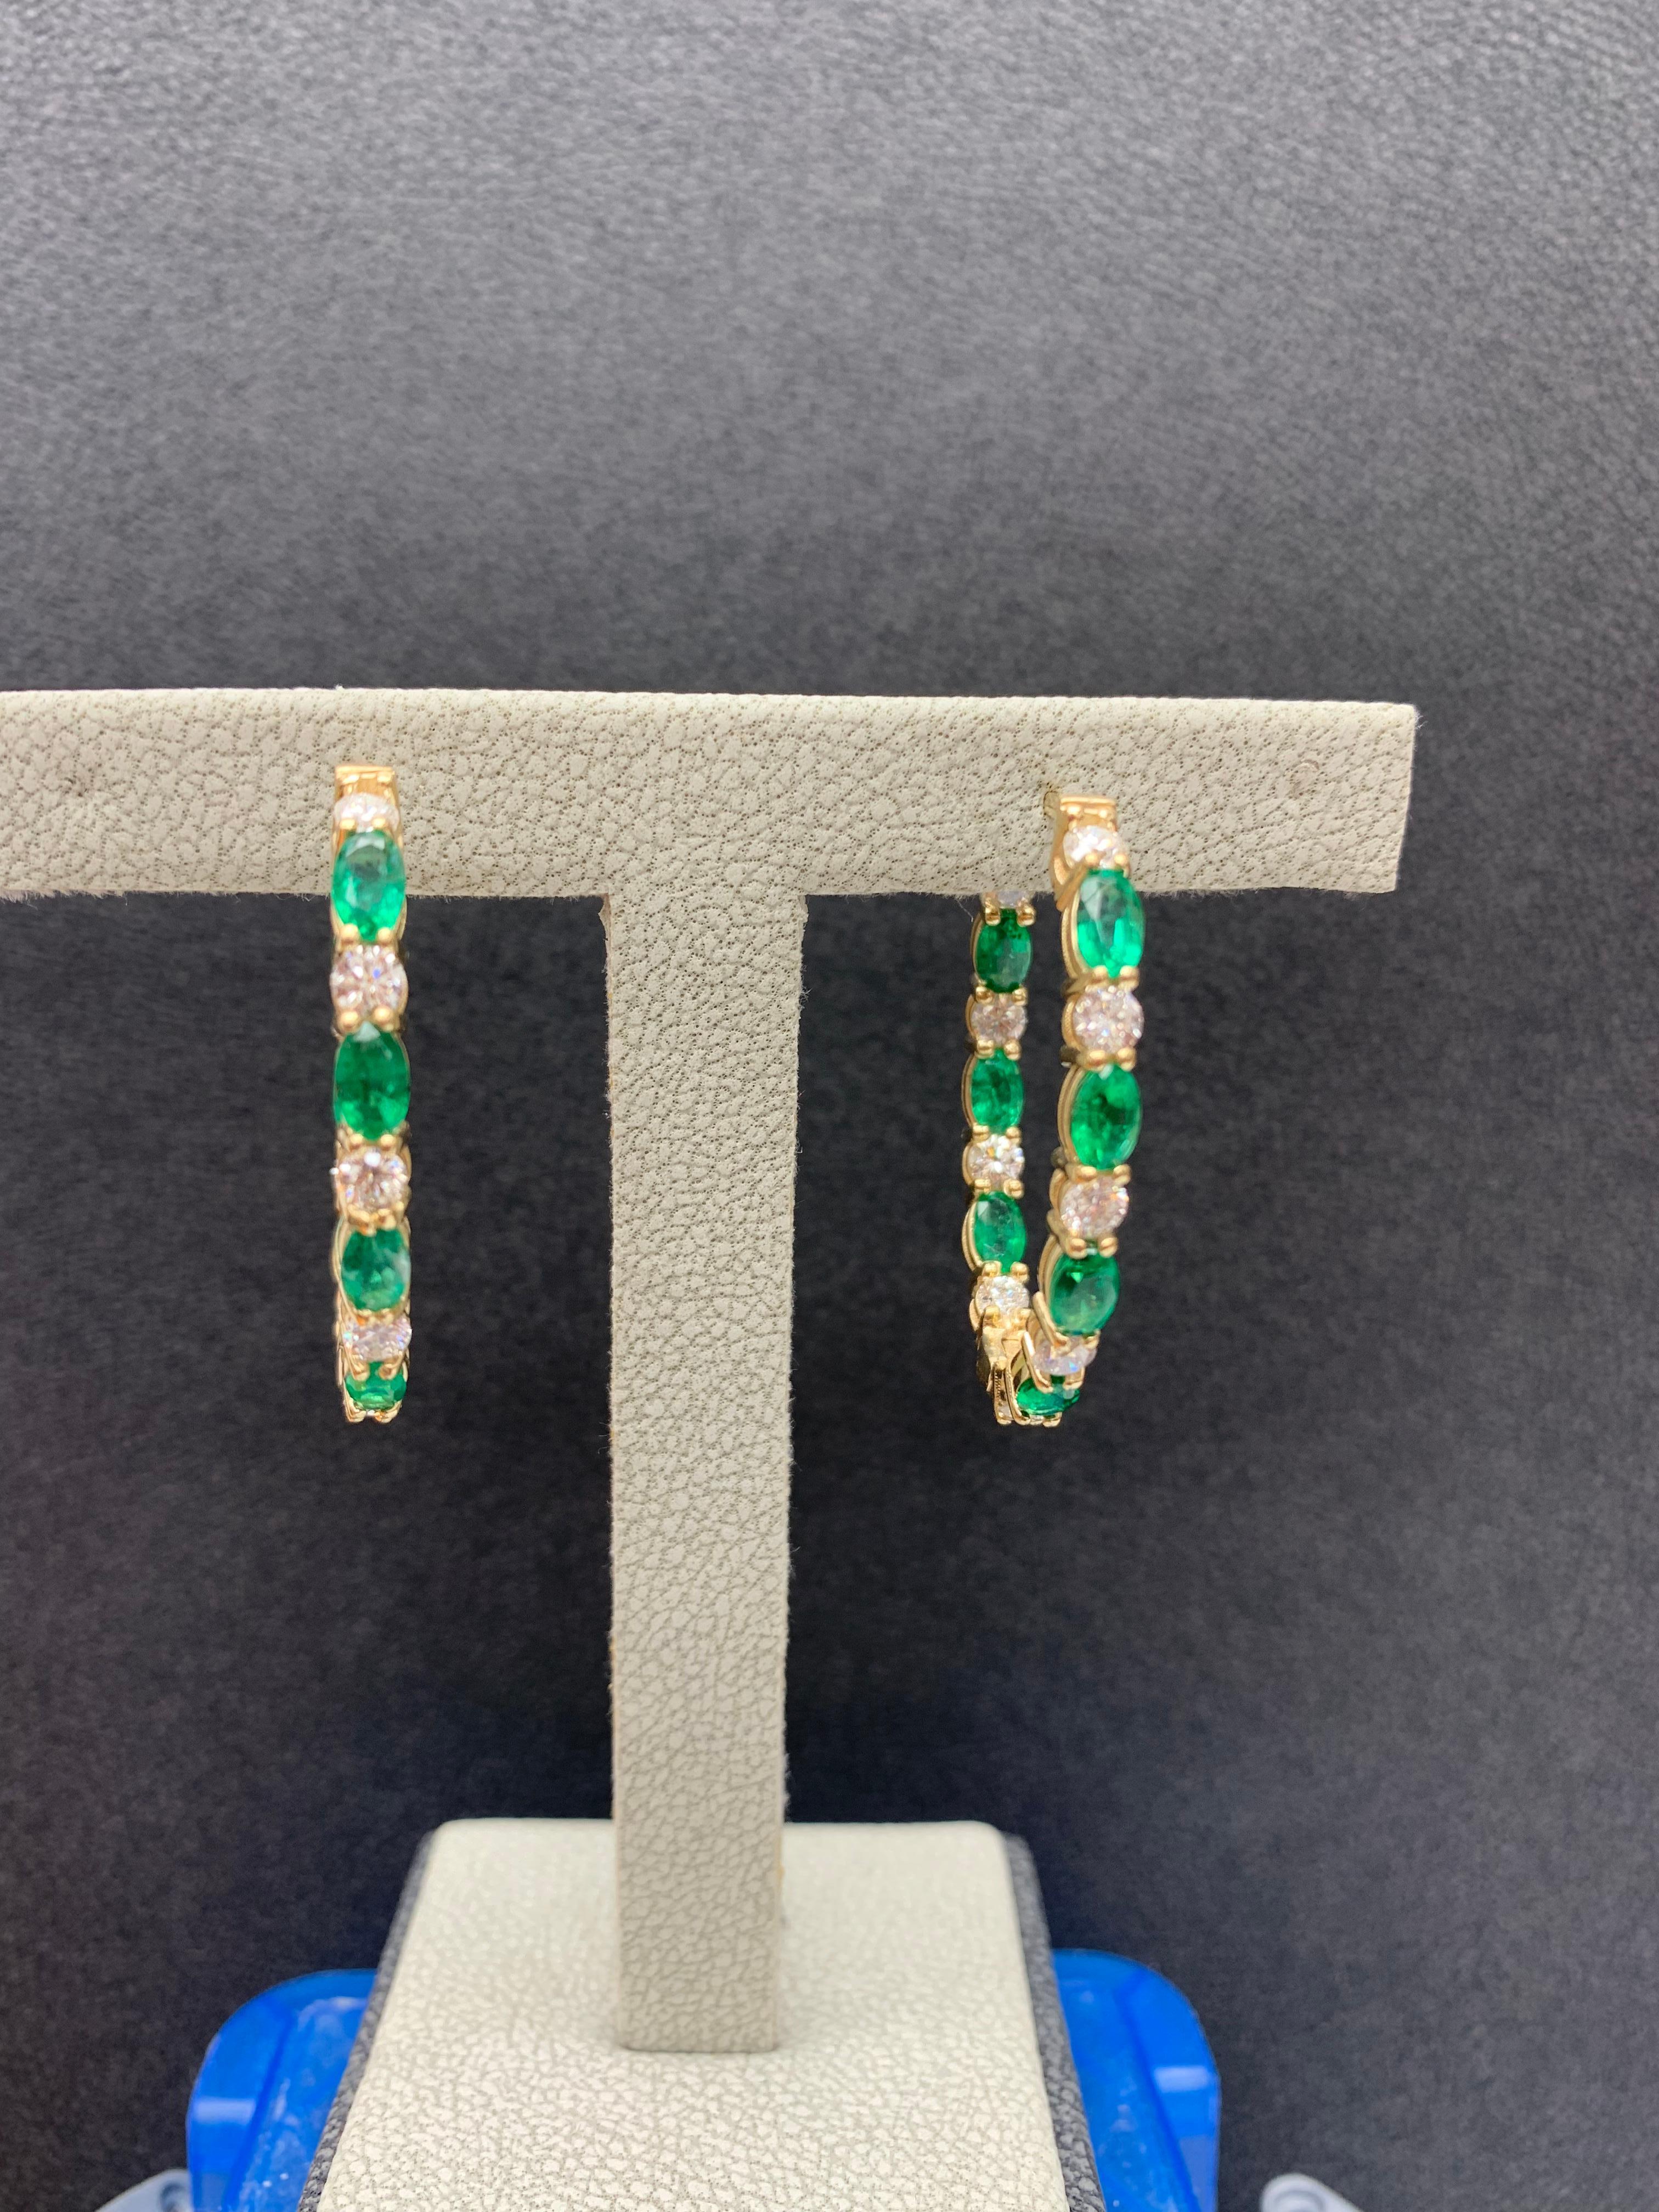 3.13 Carat Oval Cut Emerald and Diamond Hoop Earrings in 14K Yellow Gold For Sale 5